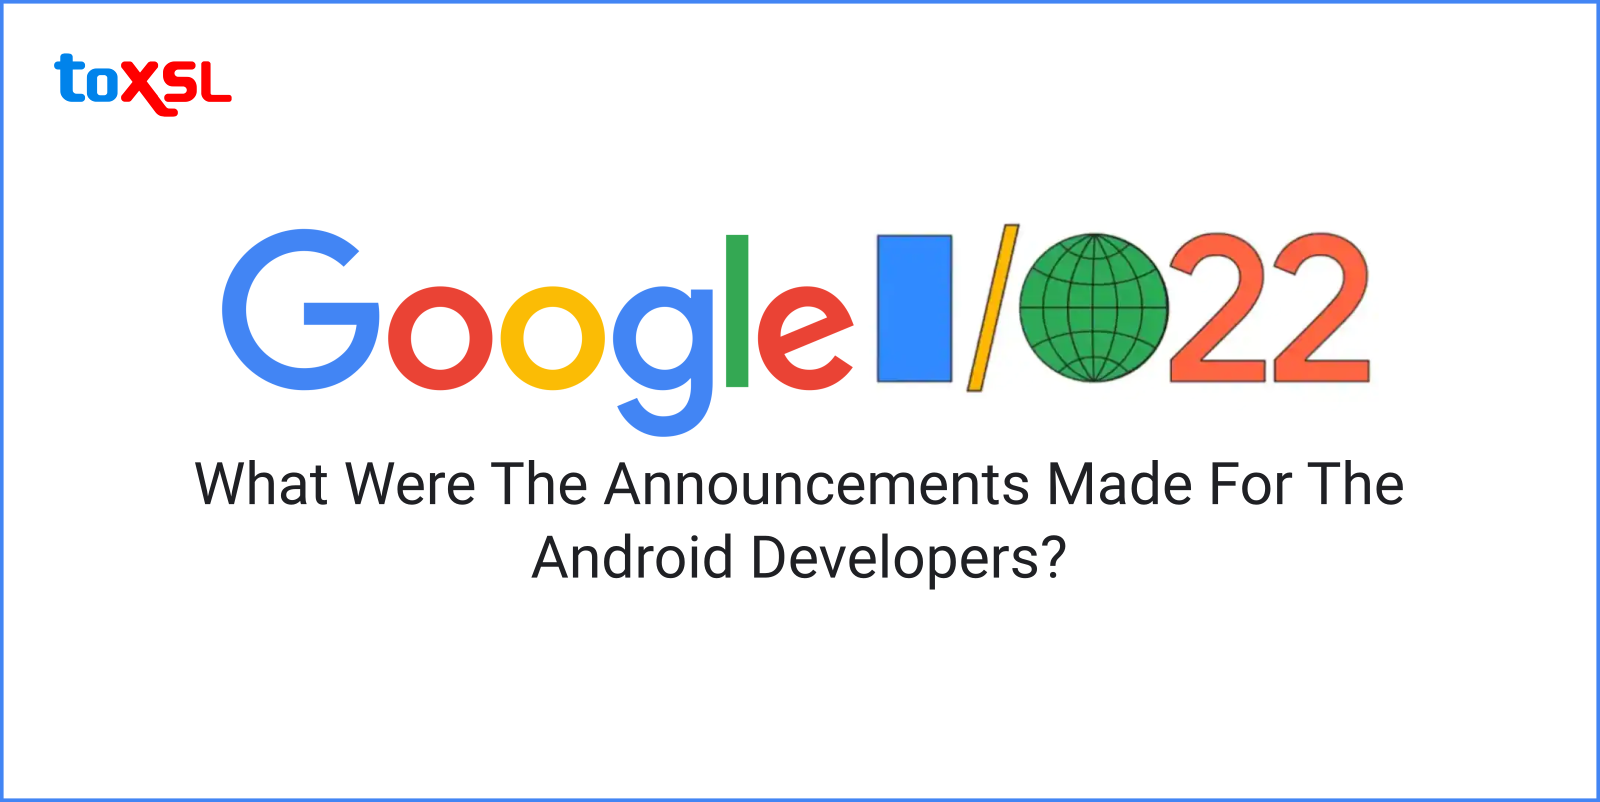 Google I/O 2022: What Were The Announcements Made For The Android Developers?